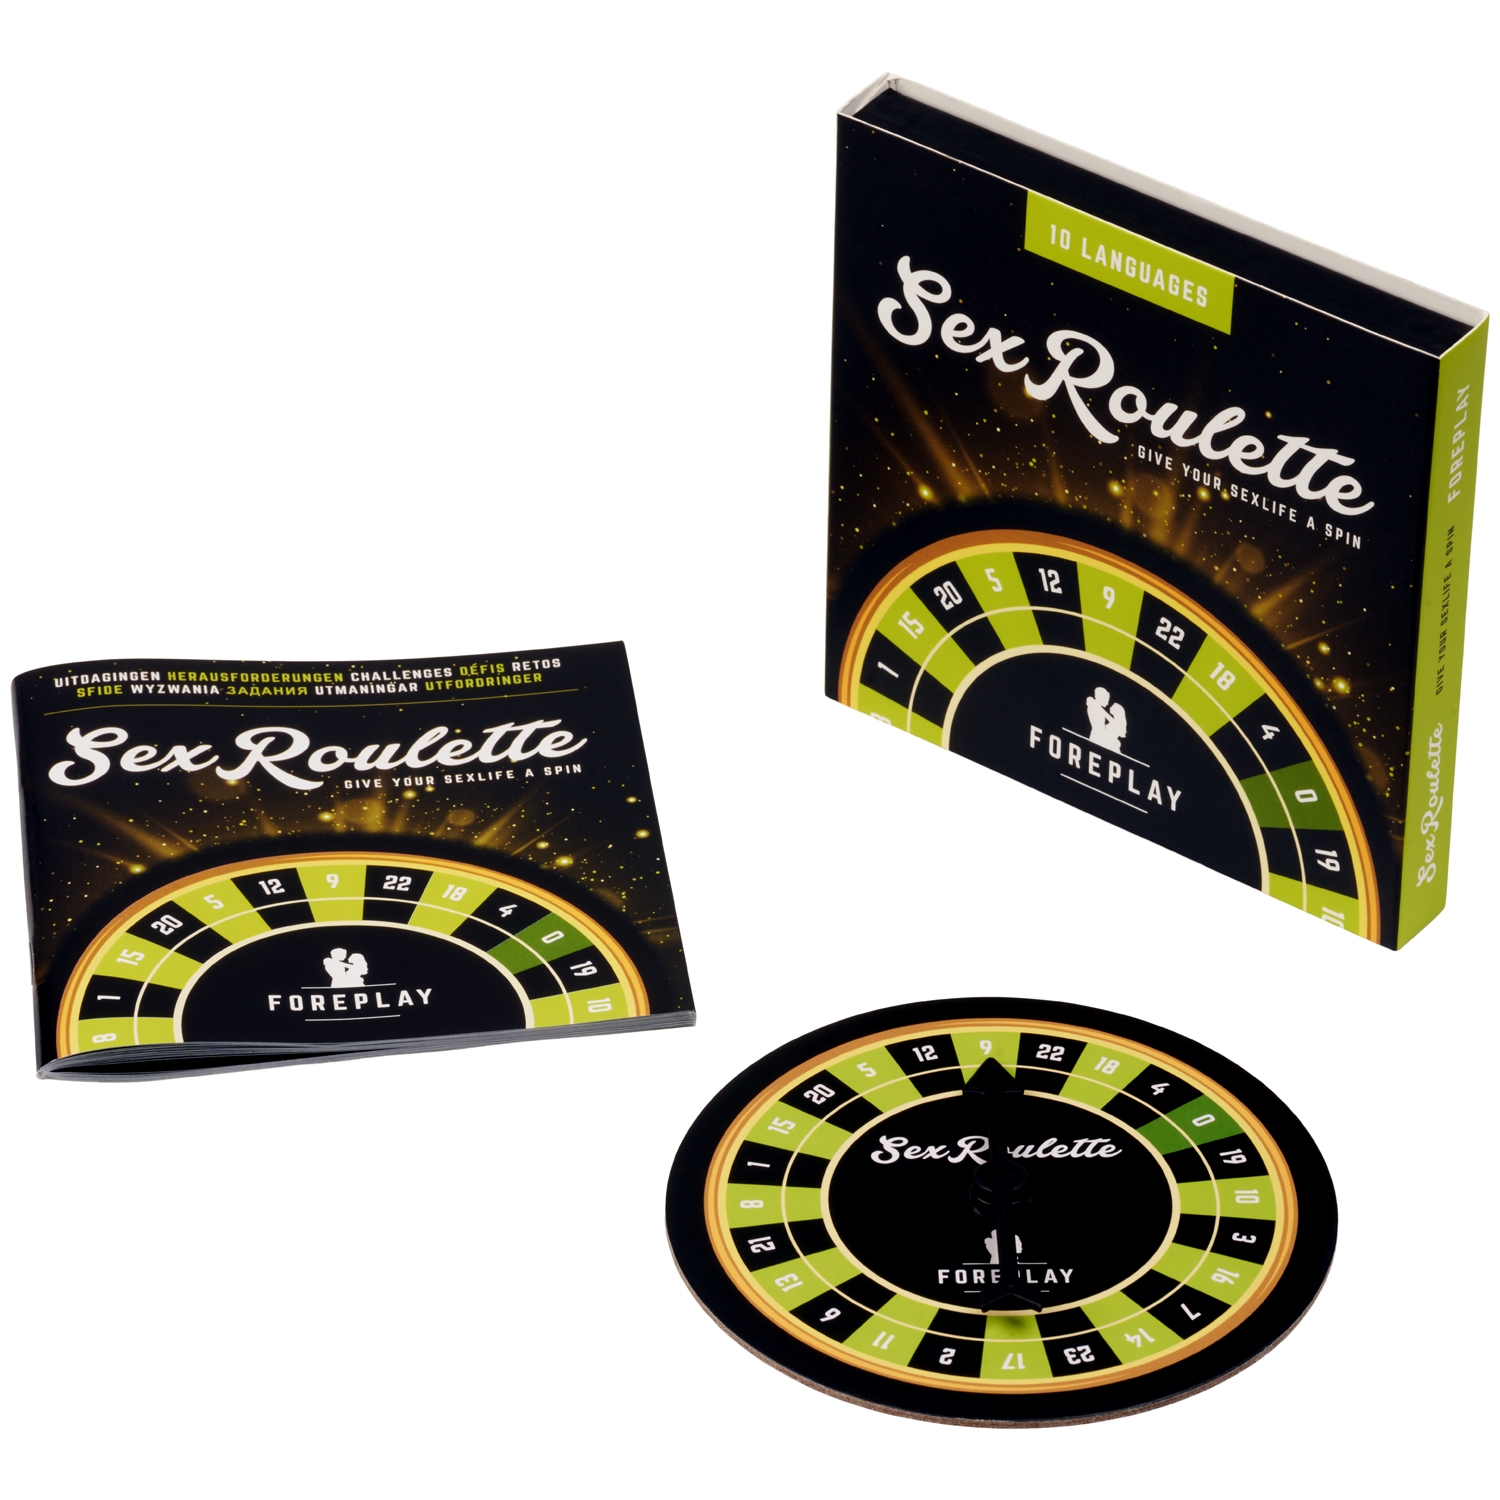 6: Tease & Please Sex Roulette Foreplay Spil      - Black